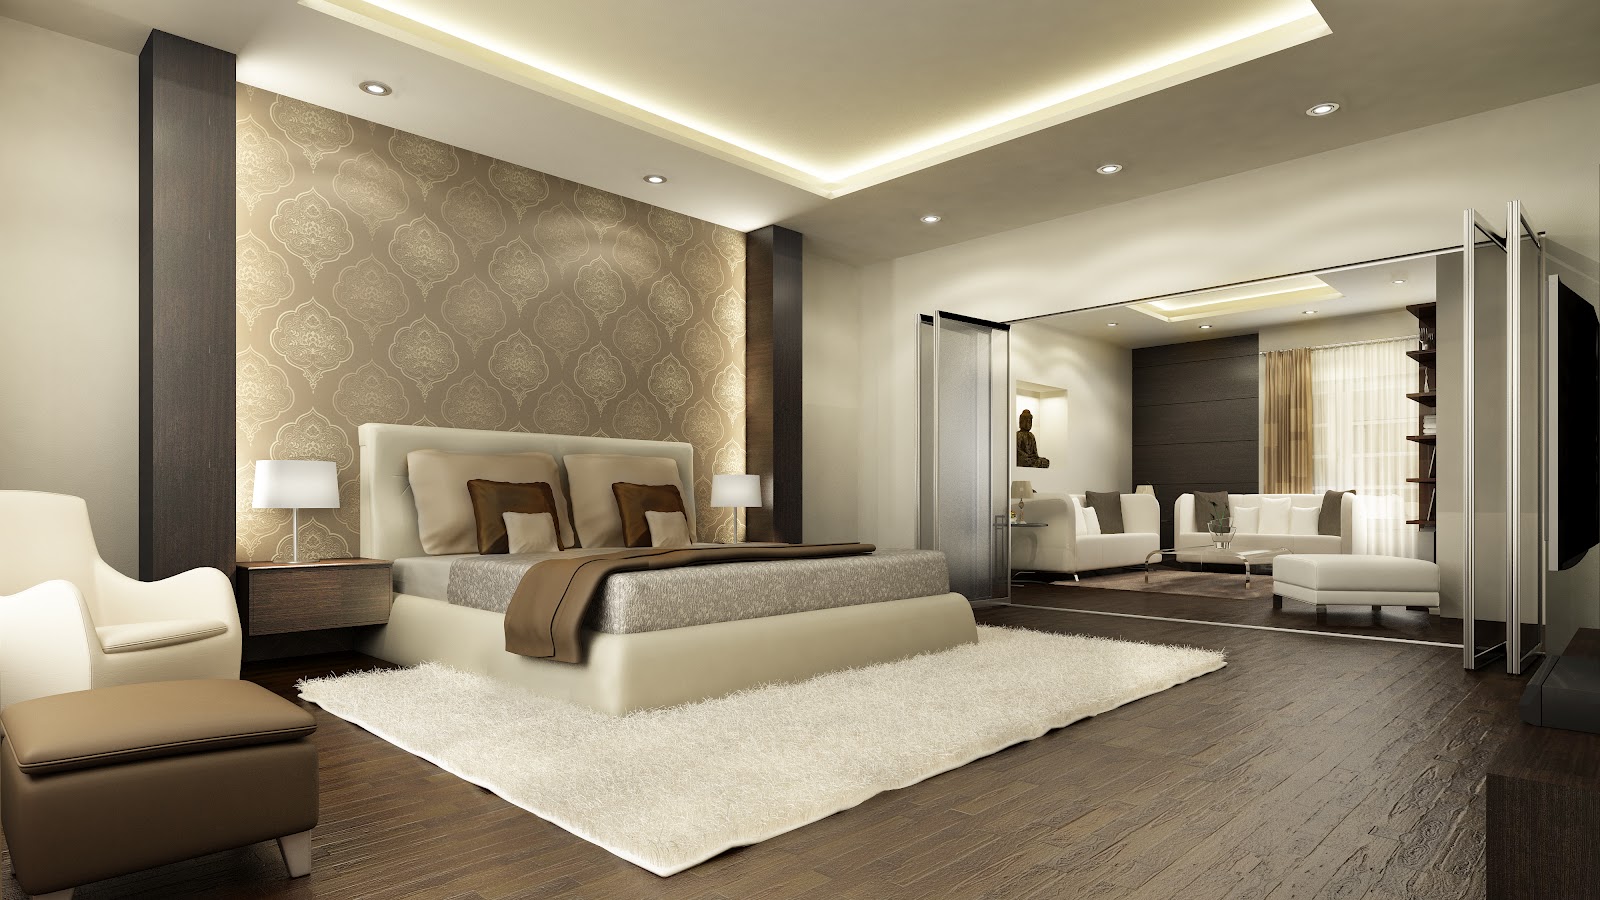 3 Bedroom Apartment Plans In India